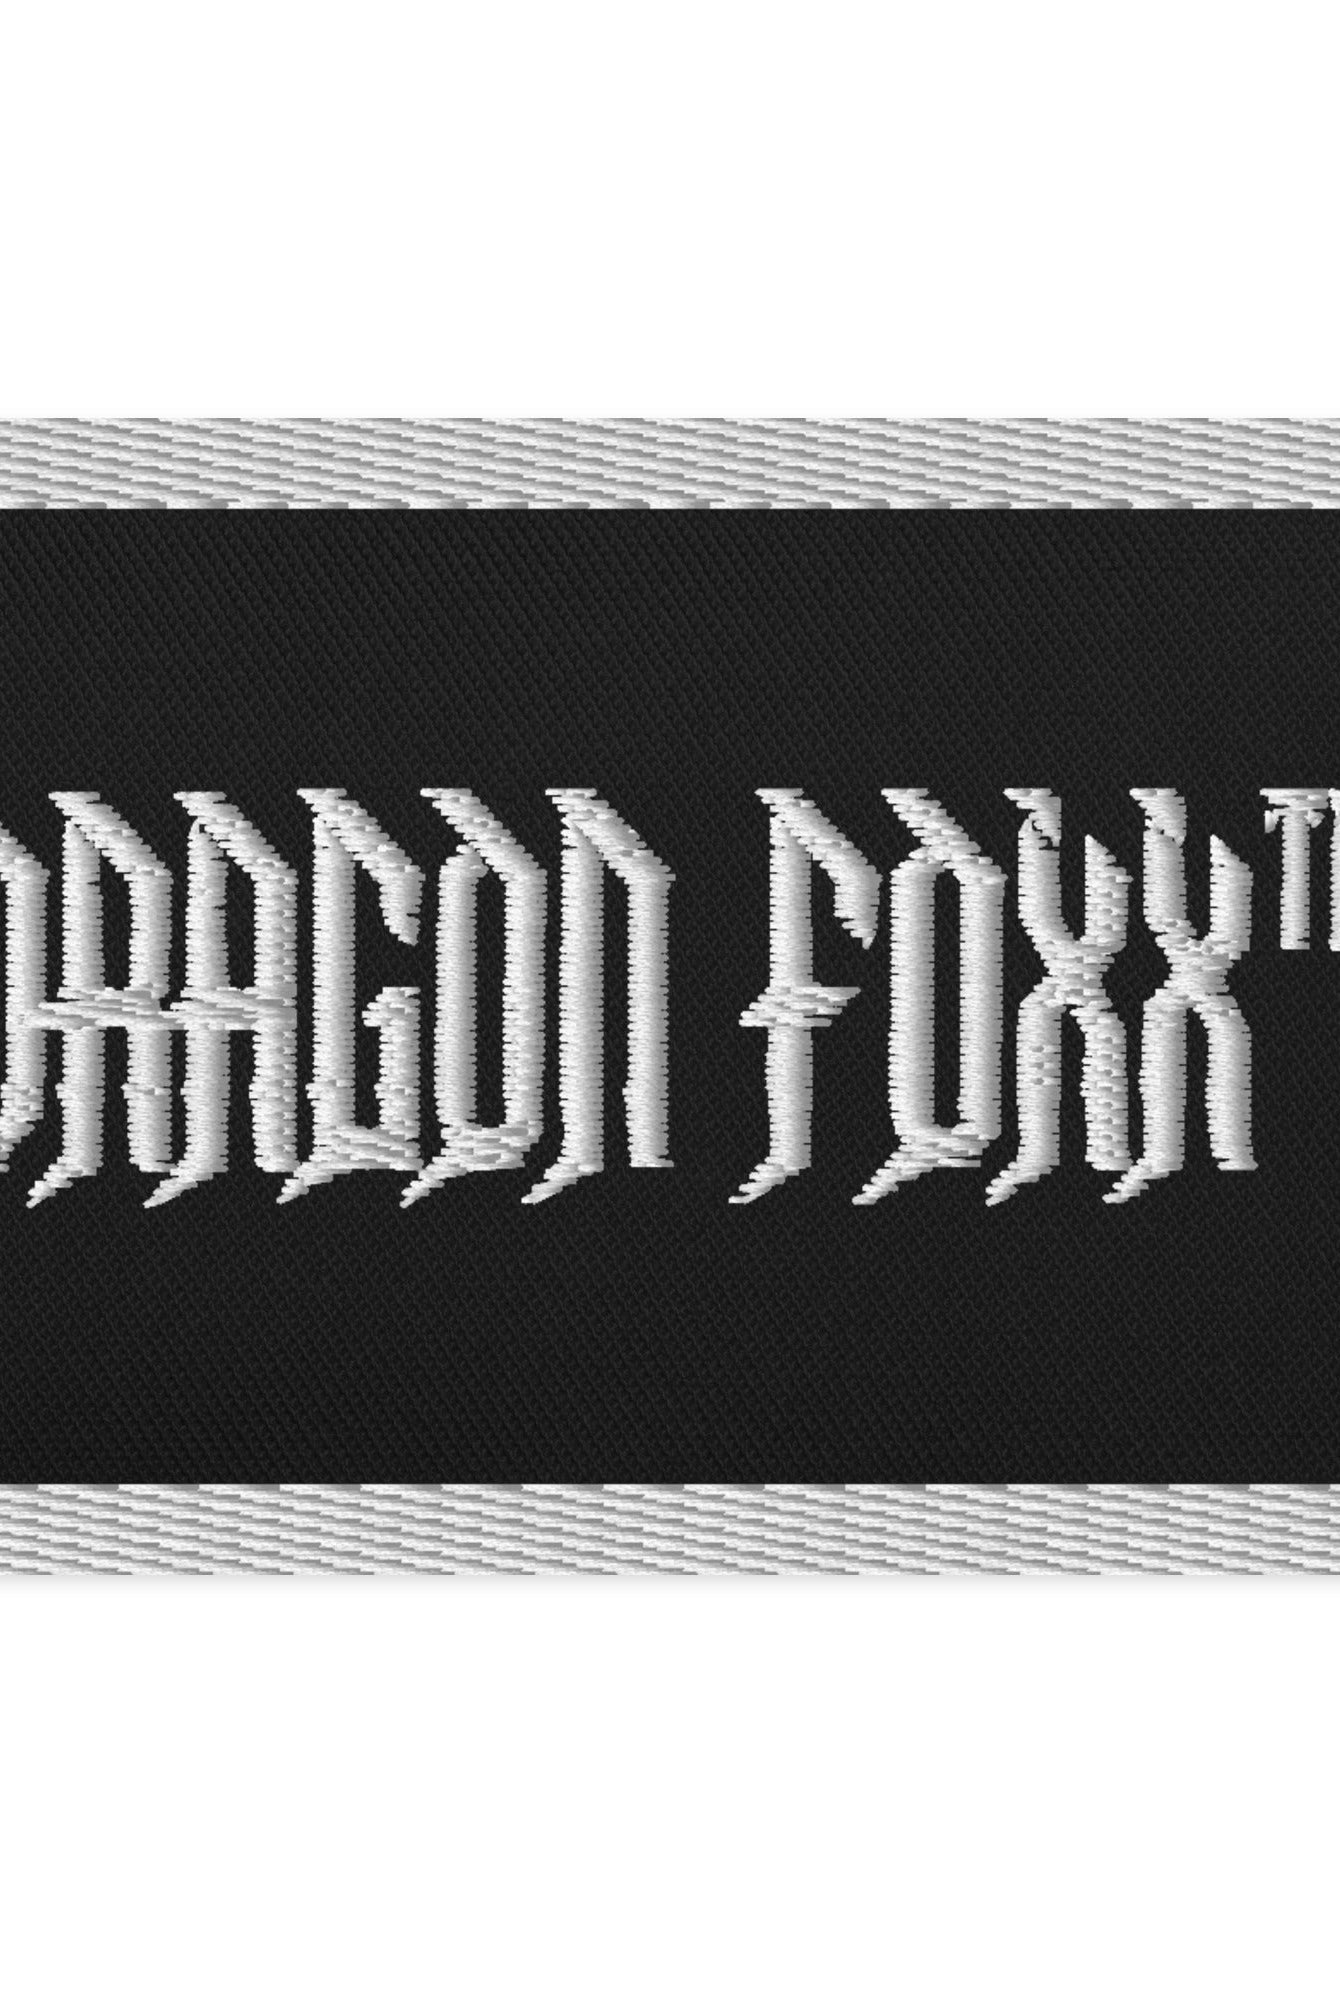 Dragon Foxx™ Embroidered Black Patch - Embroidered Patch - DRAGON FOXX™ - Dragon Foxx™ Embroidered Black Patch - 3932895_15563 - 3.5″×2.25″ - Black - 3.5″×2.25″ Patch - Black Patch - Dragon Foxx™